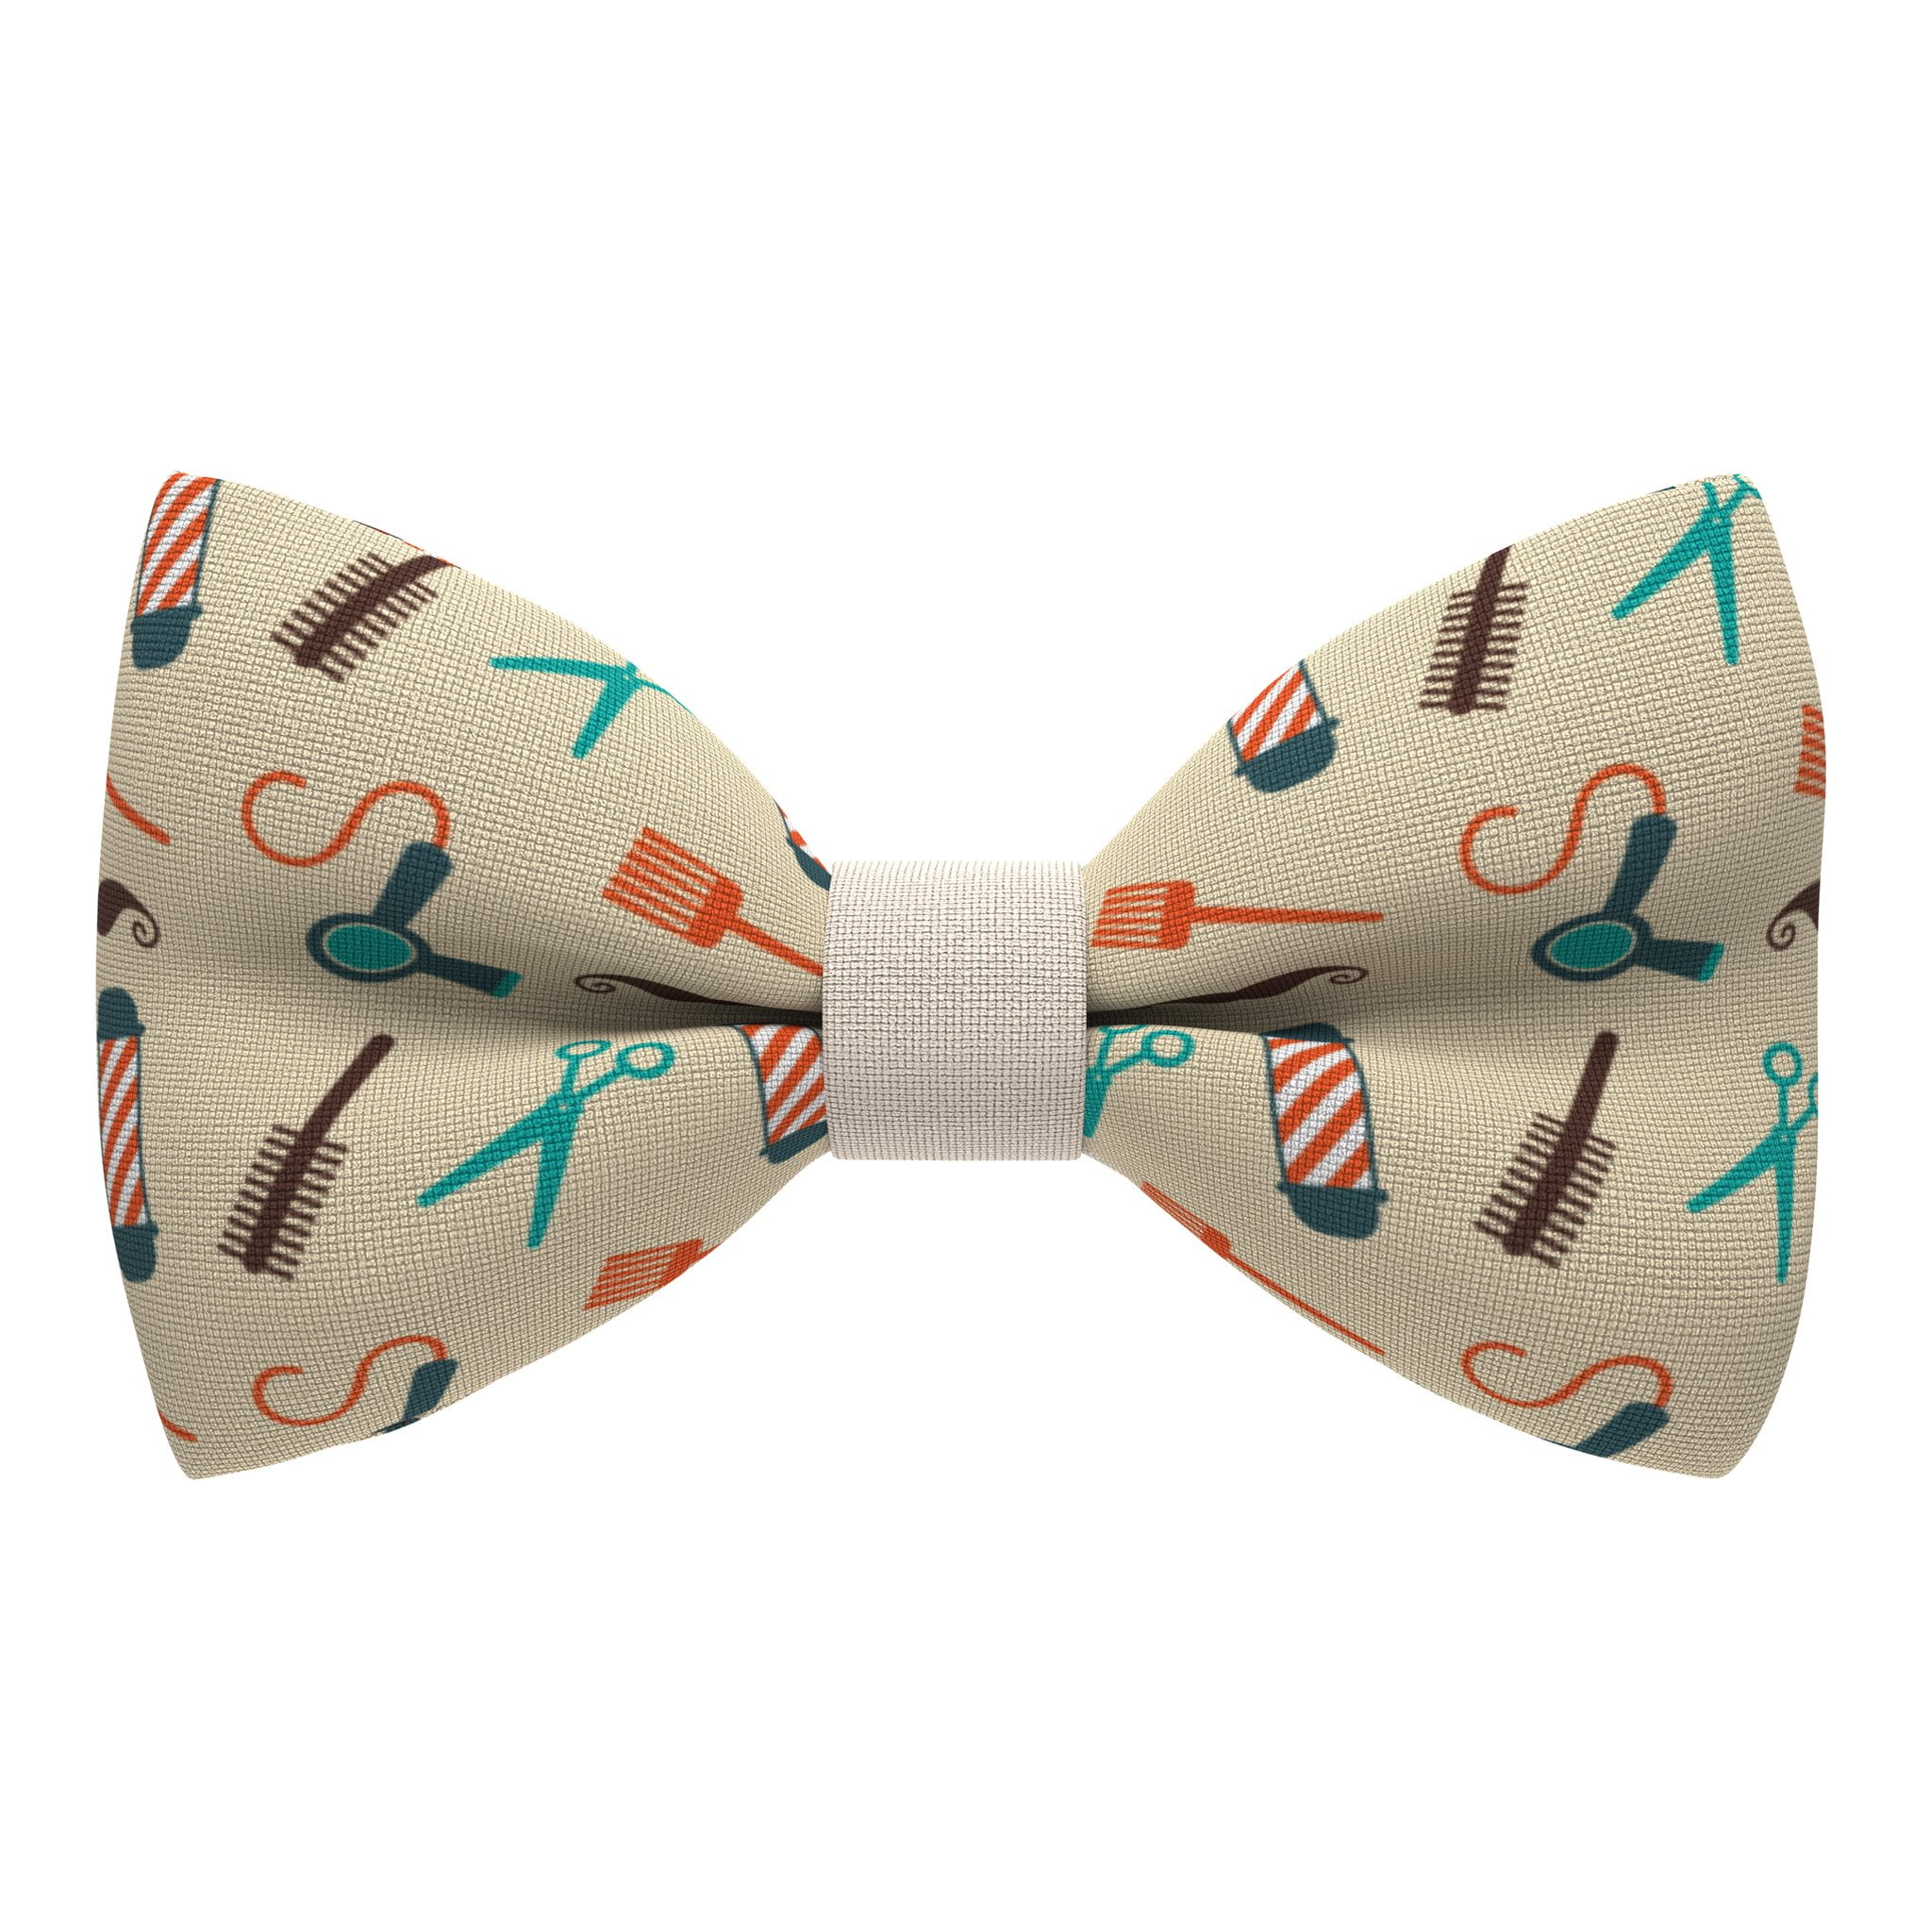 Saint Patrick`s day pattern pre-tied unisex shamrock bow tie by Bow Tie House